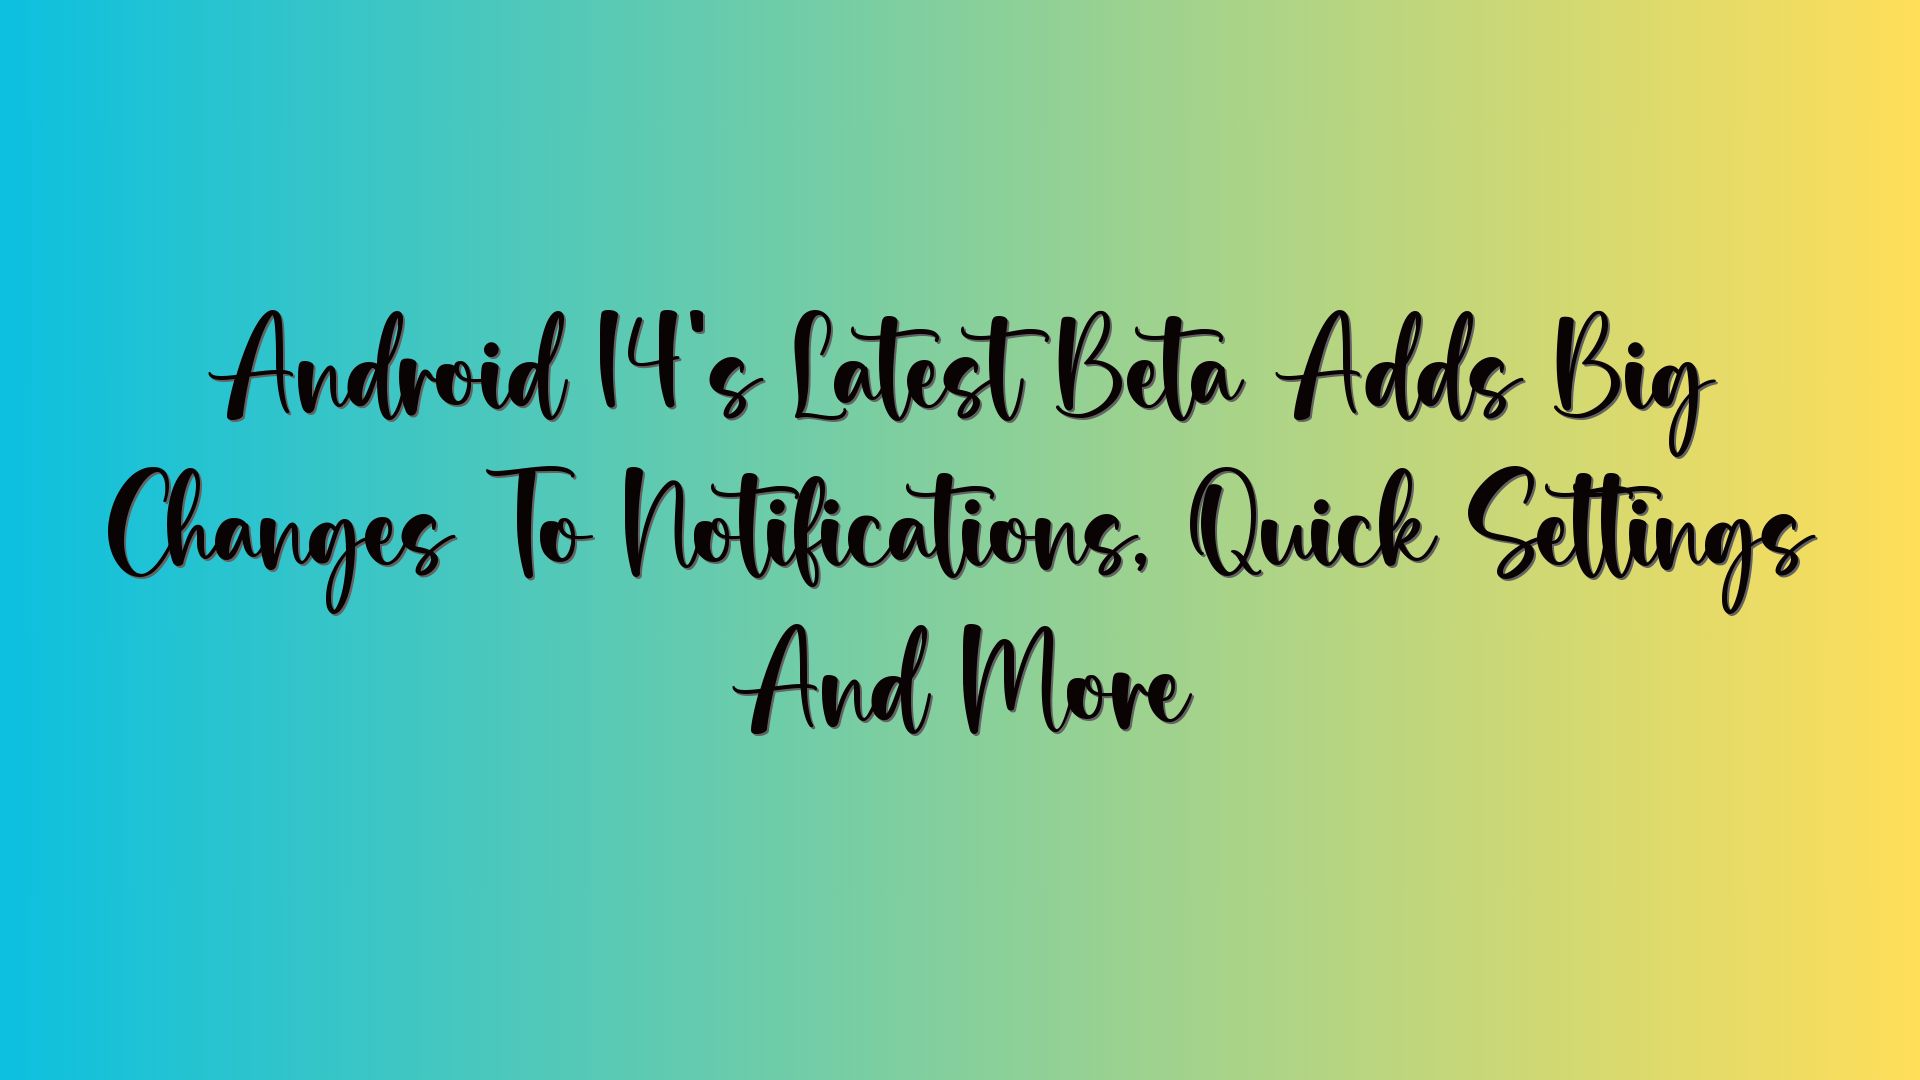 Android 14’s Latest Beta Adds Big Changes To Notifications, Quick Settings And More